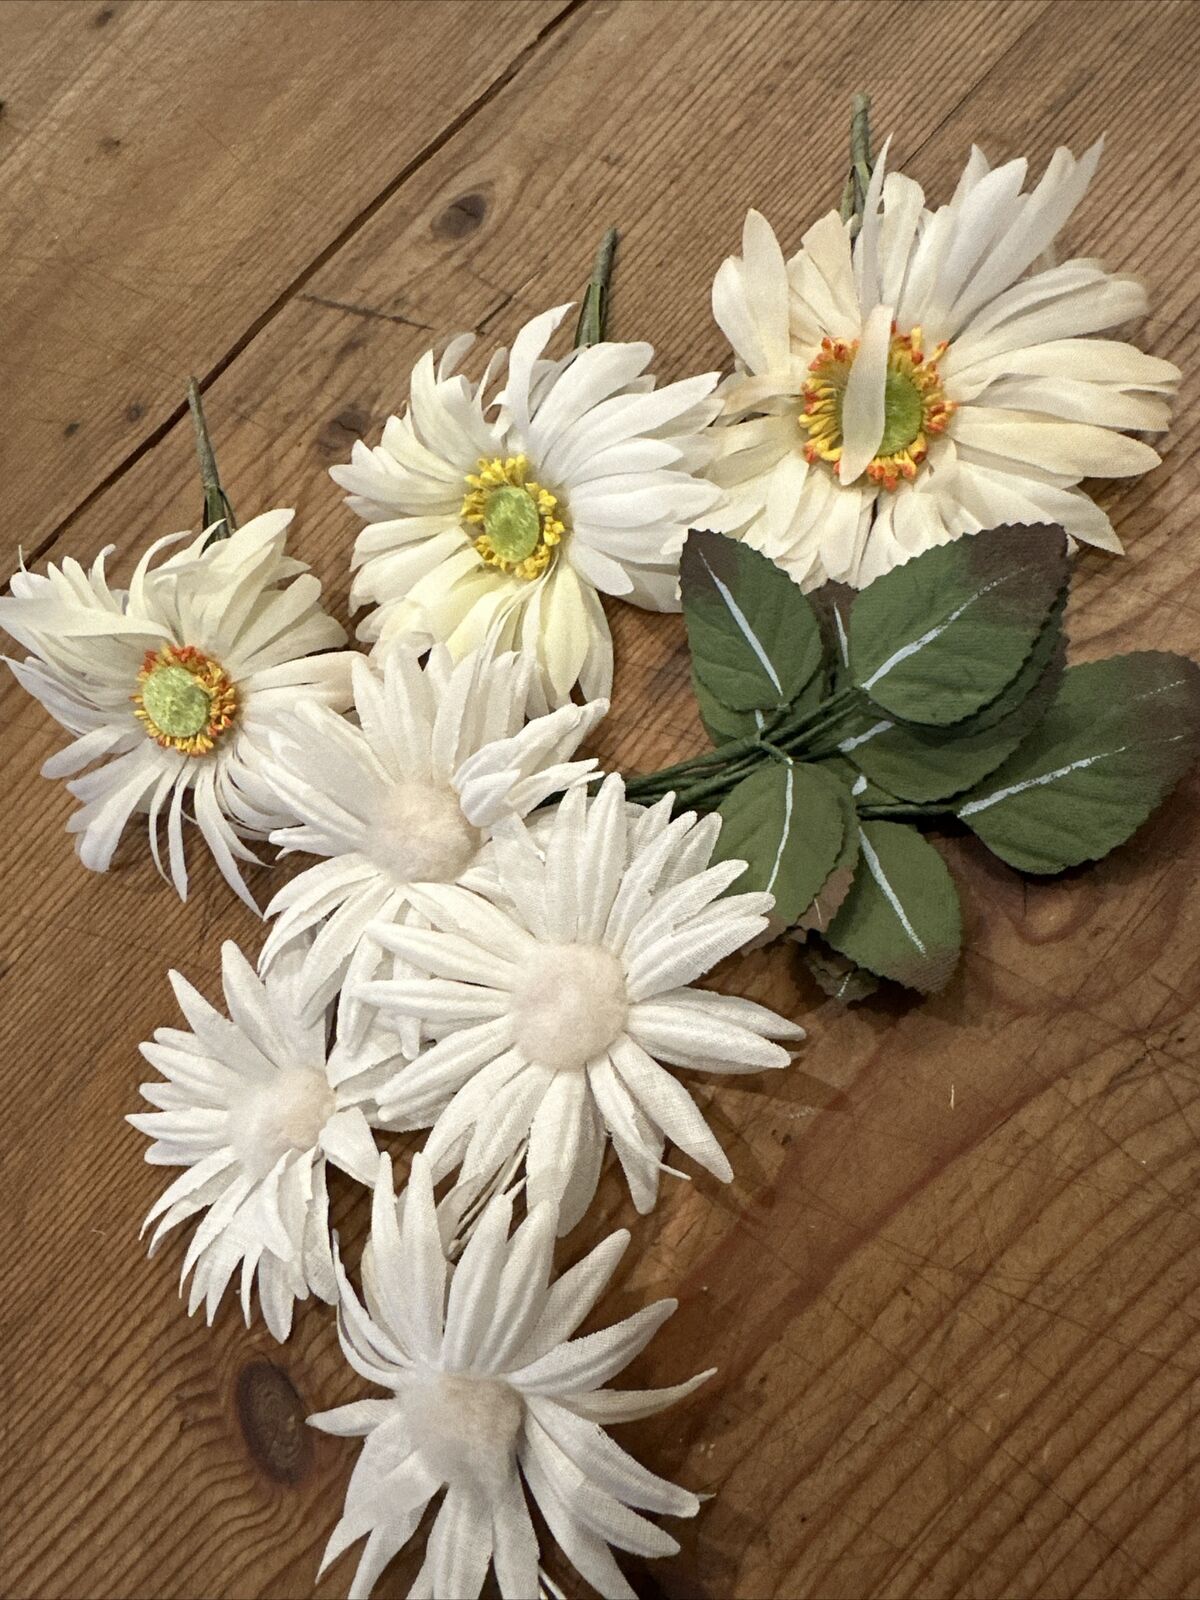 Lot E - Vintage antique Millinery Creamy White Daisy Flowers And Leaves